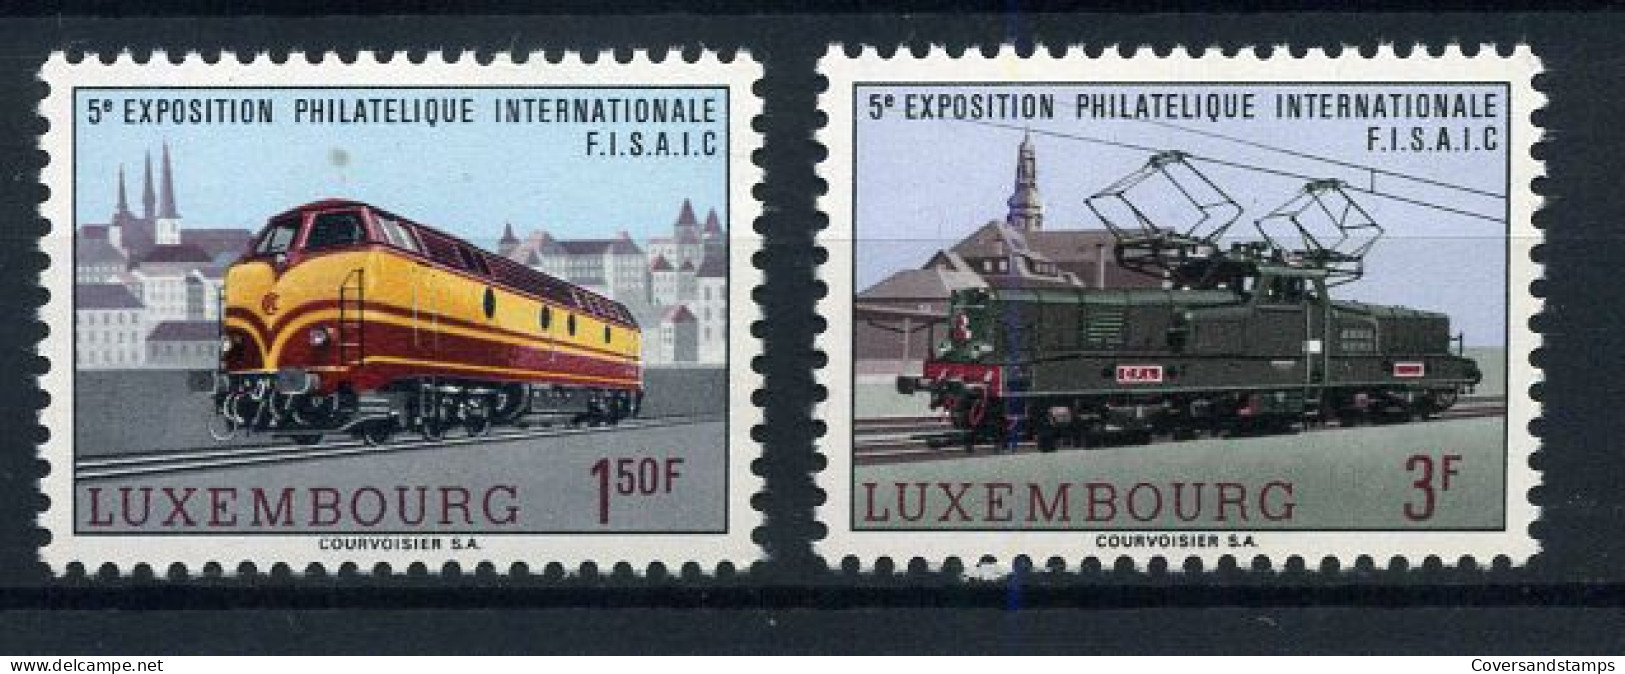 Luxembourg - Yv 686/87 - ** MNH  - Trains